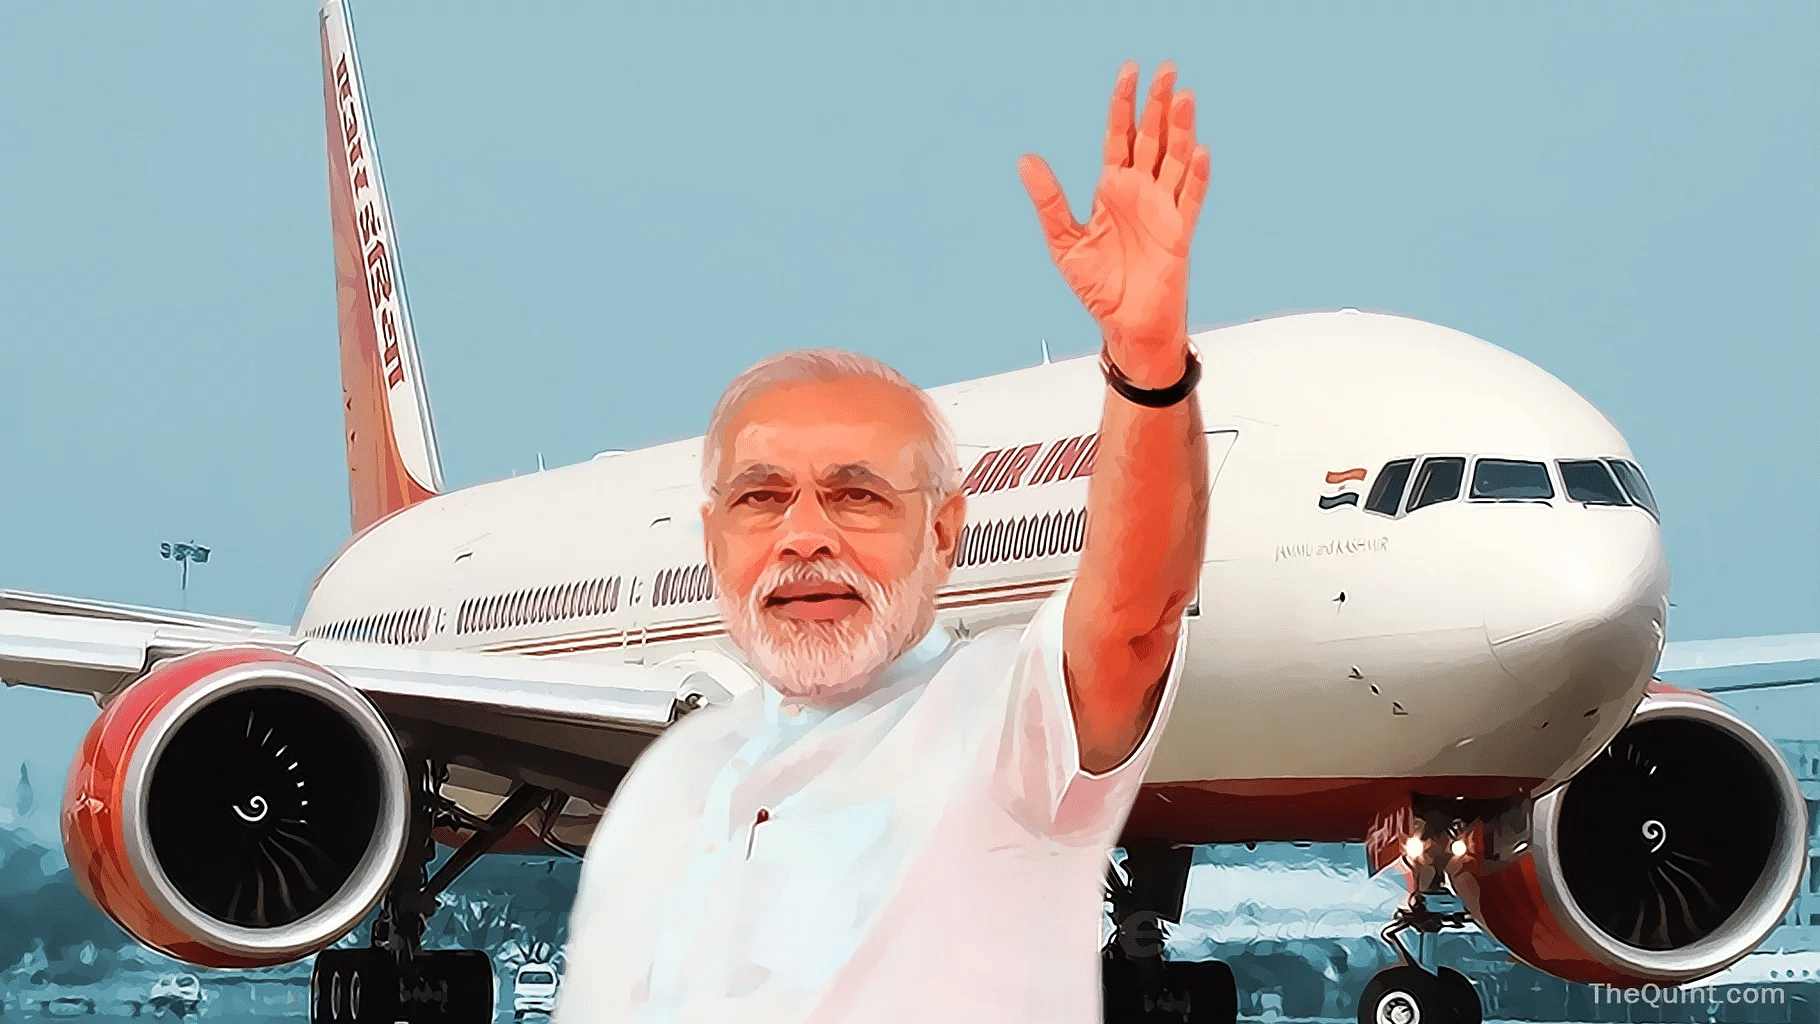 In response to the RTI application, Air India said they’d been “advised not to disclose information about the PM’s flights to RTI queries”.